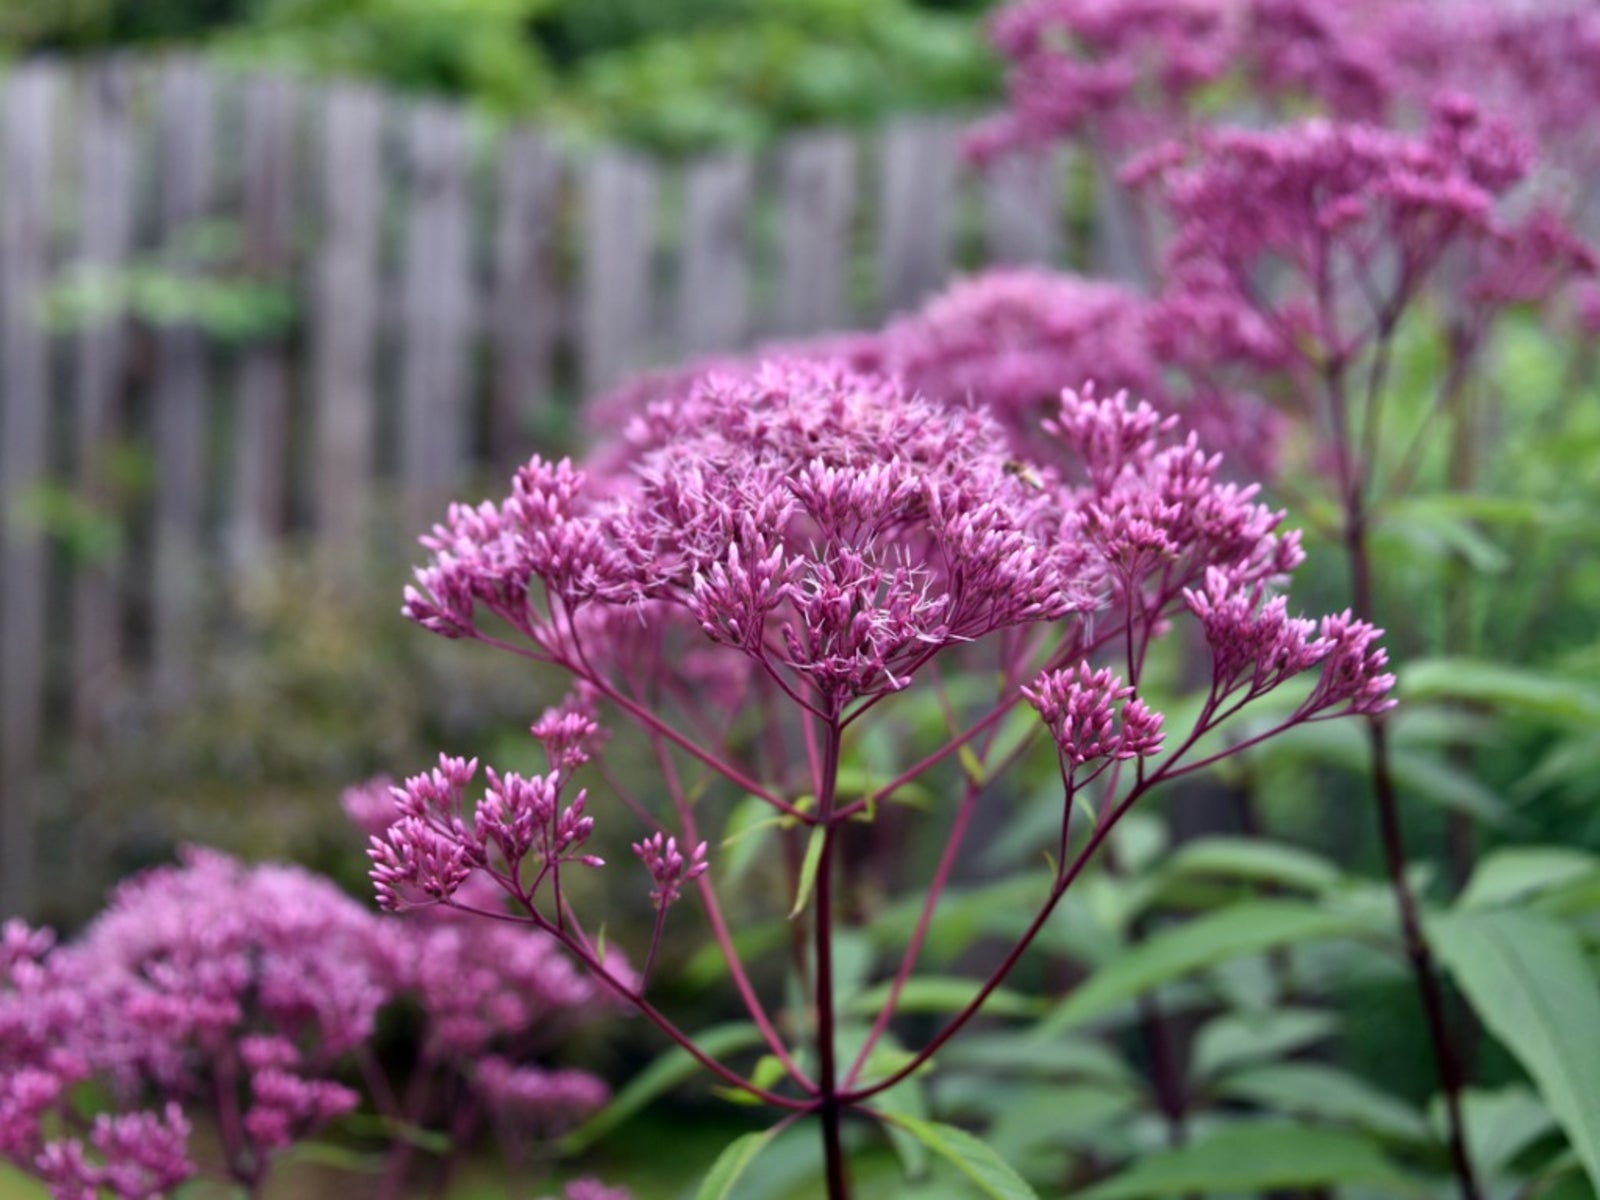 joe-pye weed plant: growing and caring for joe-pye weeds in the garden